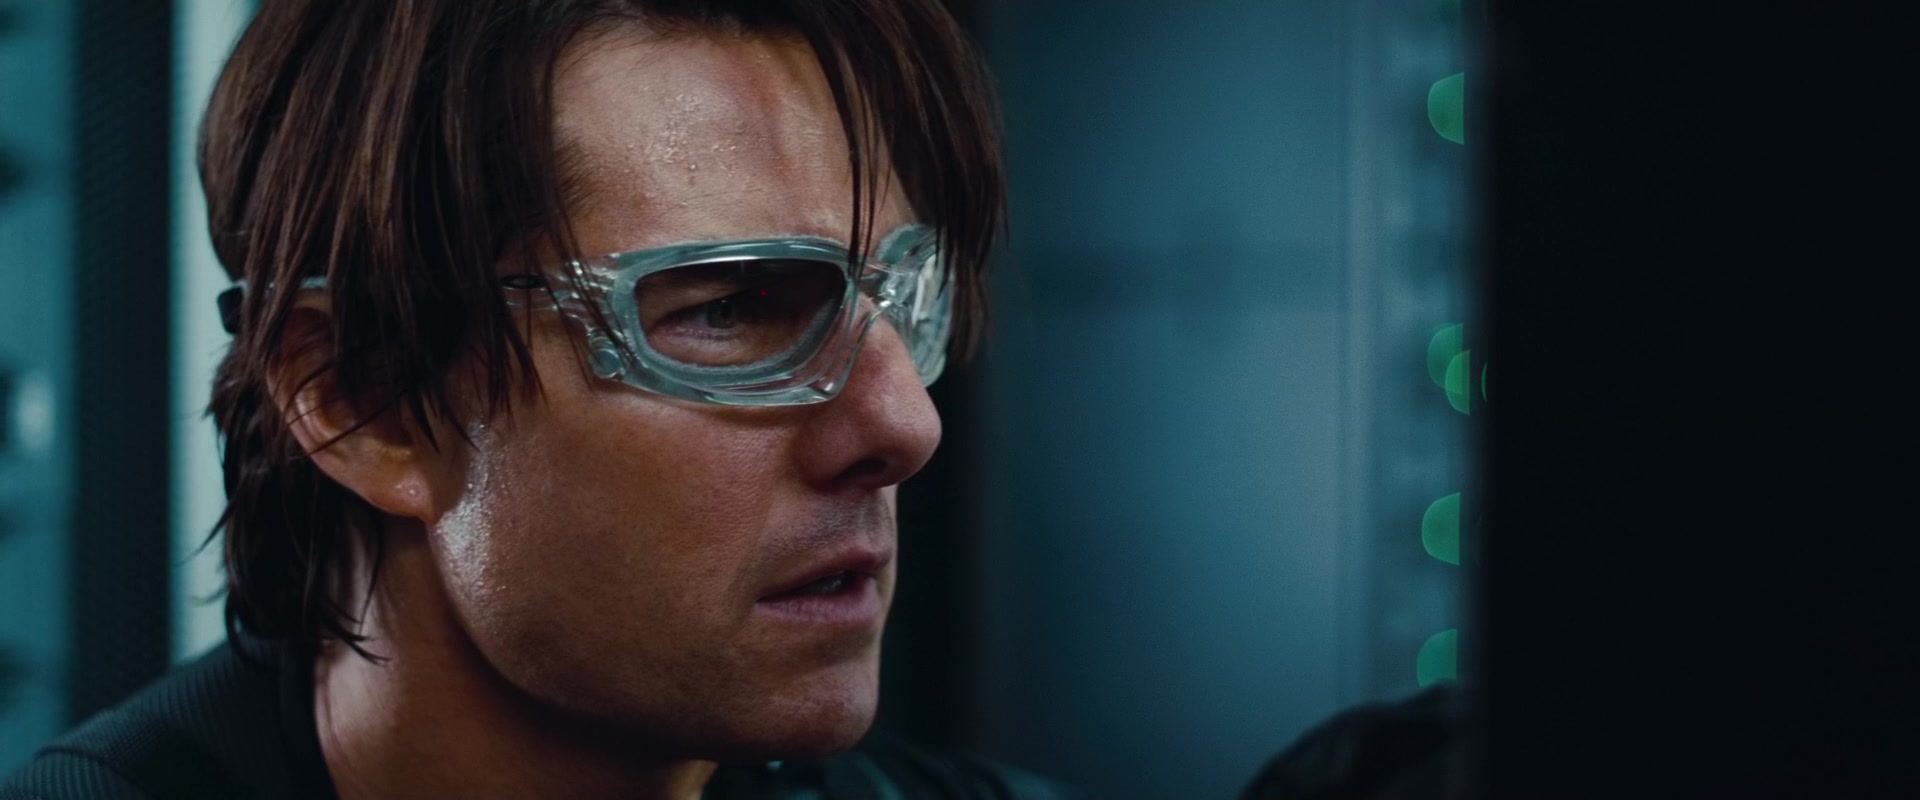 Oakley Wind Jacket Glasses worn by Tom Cruise in Mission: Impossible - Ghost Protocol ...1920 x 800